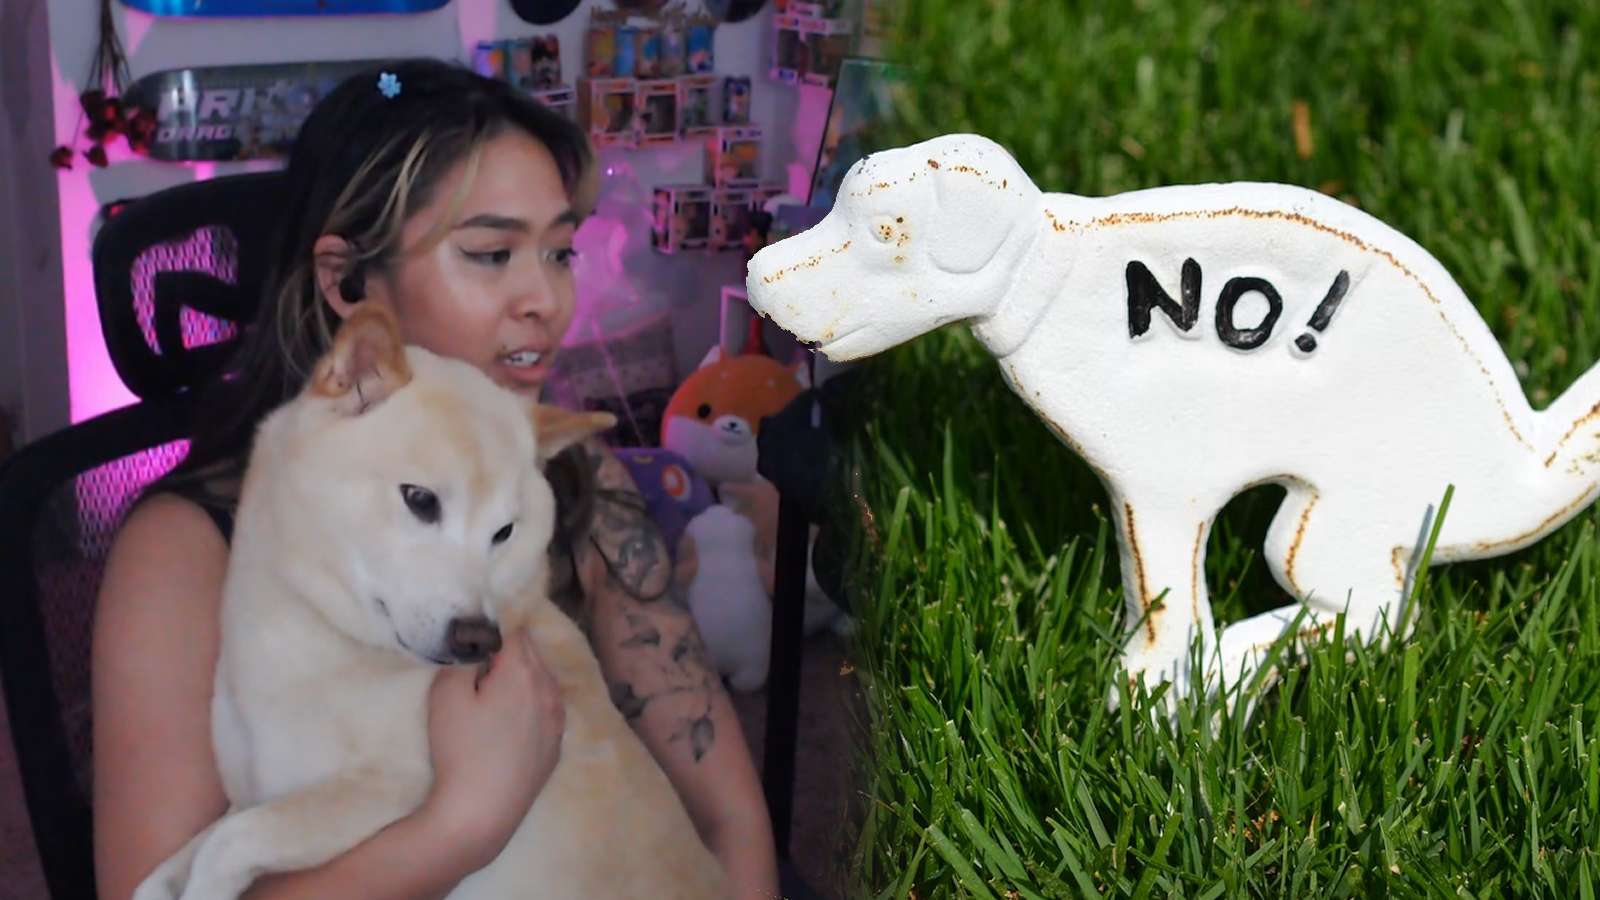 Twitch streamer mortified after dog poops on her while live